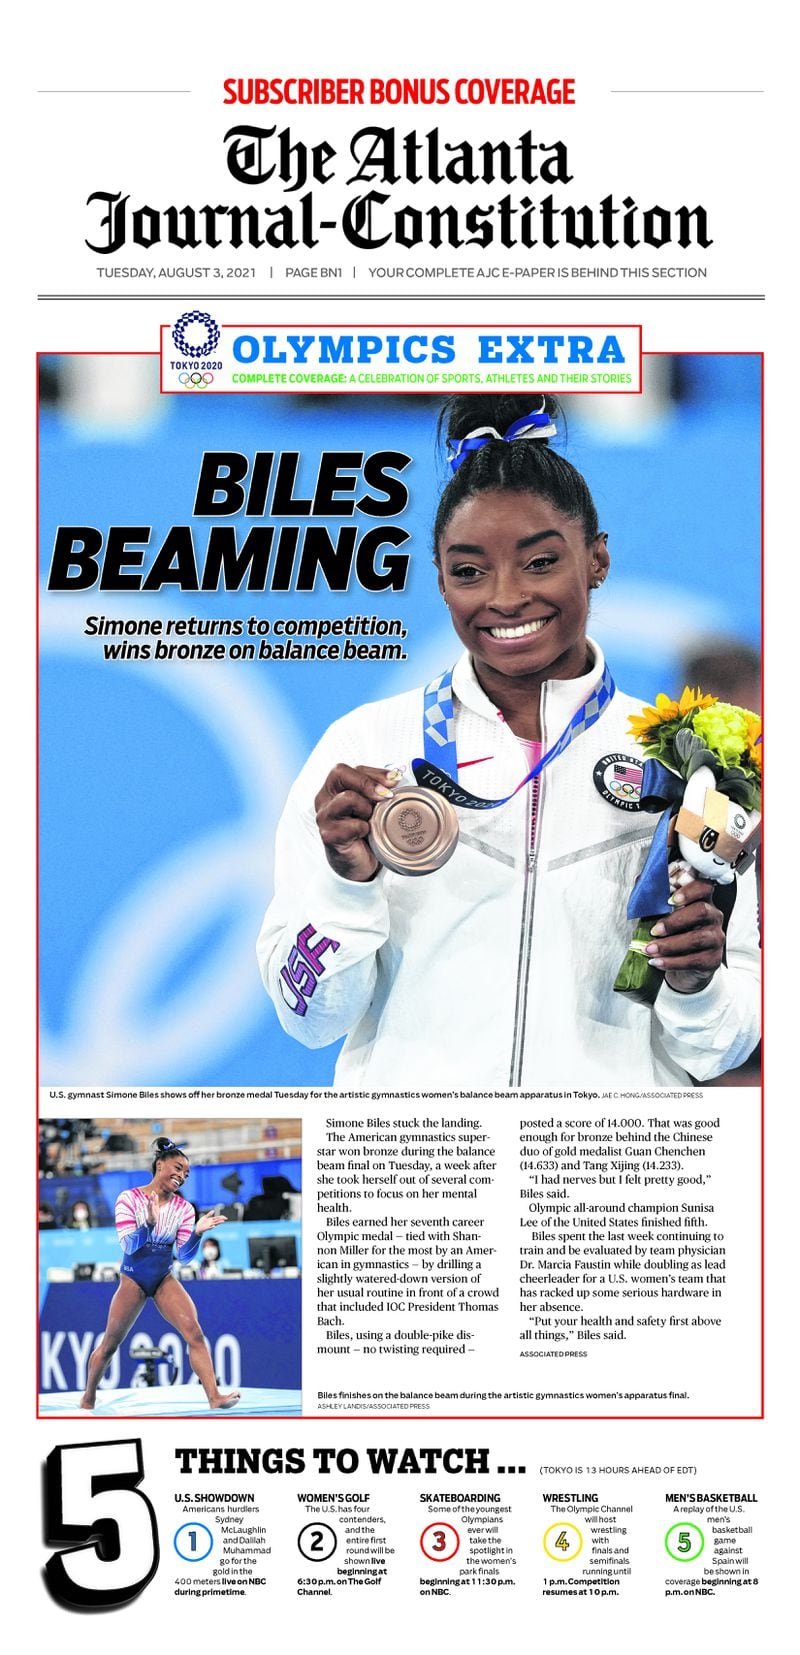 Tokyo Olympic Extra in today’s ePaper: Simone Biles Beaming